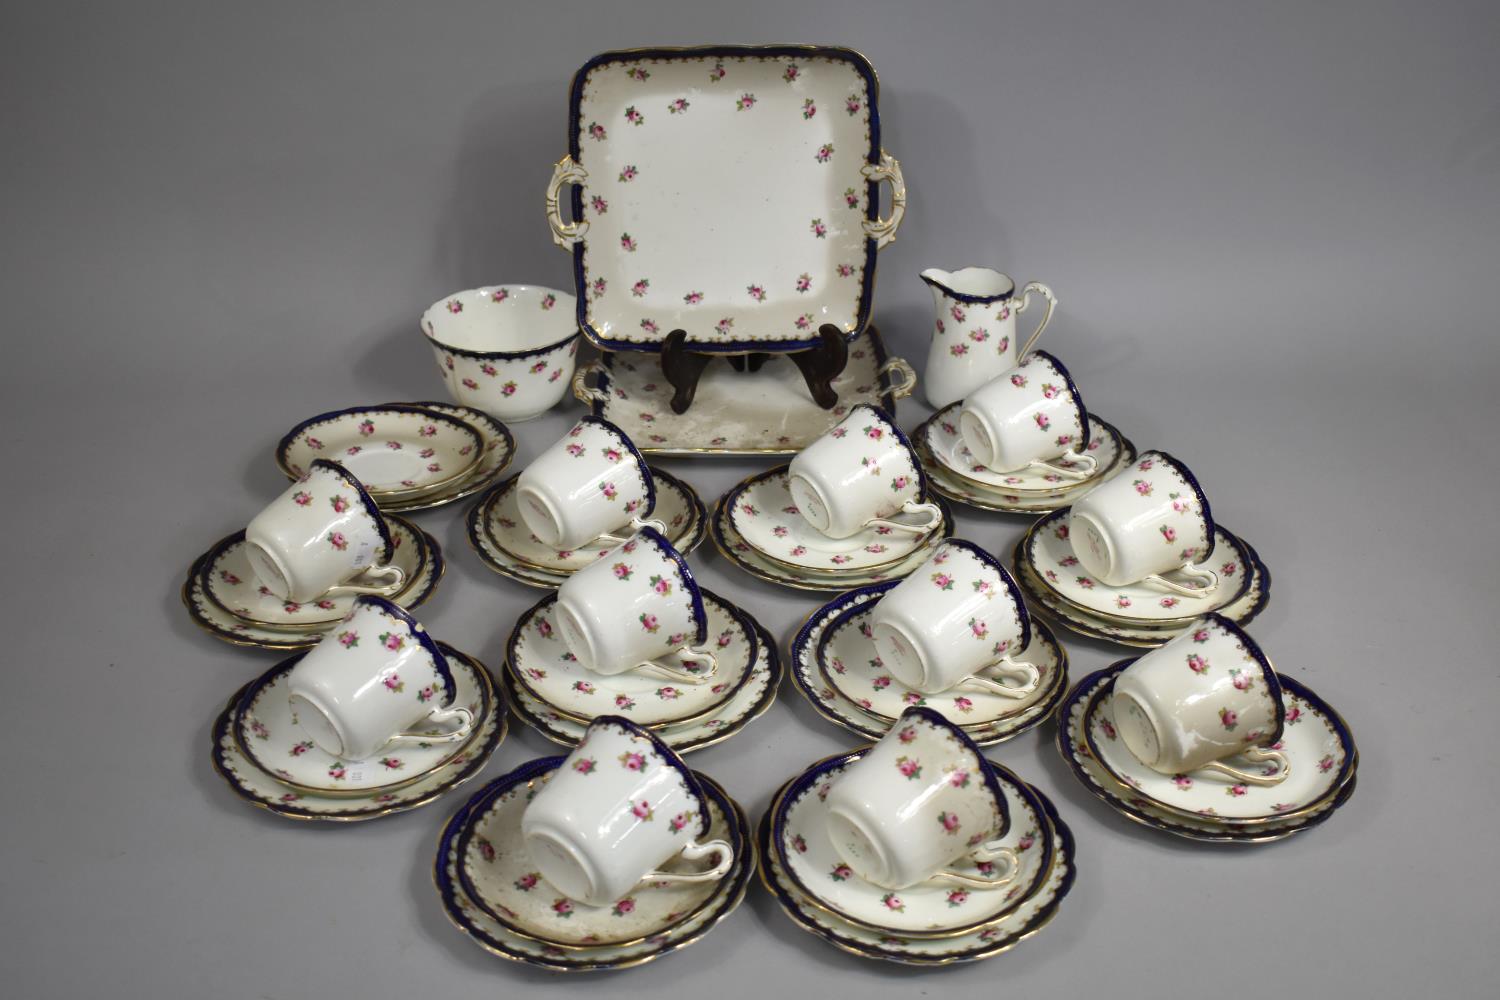 An Edwardian Grosvenor Rose Decorated China Tea Set to Comprise Eleven Cups, Twelve Saucers, Two